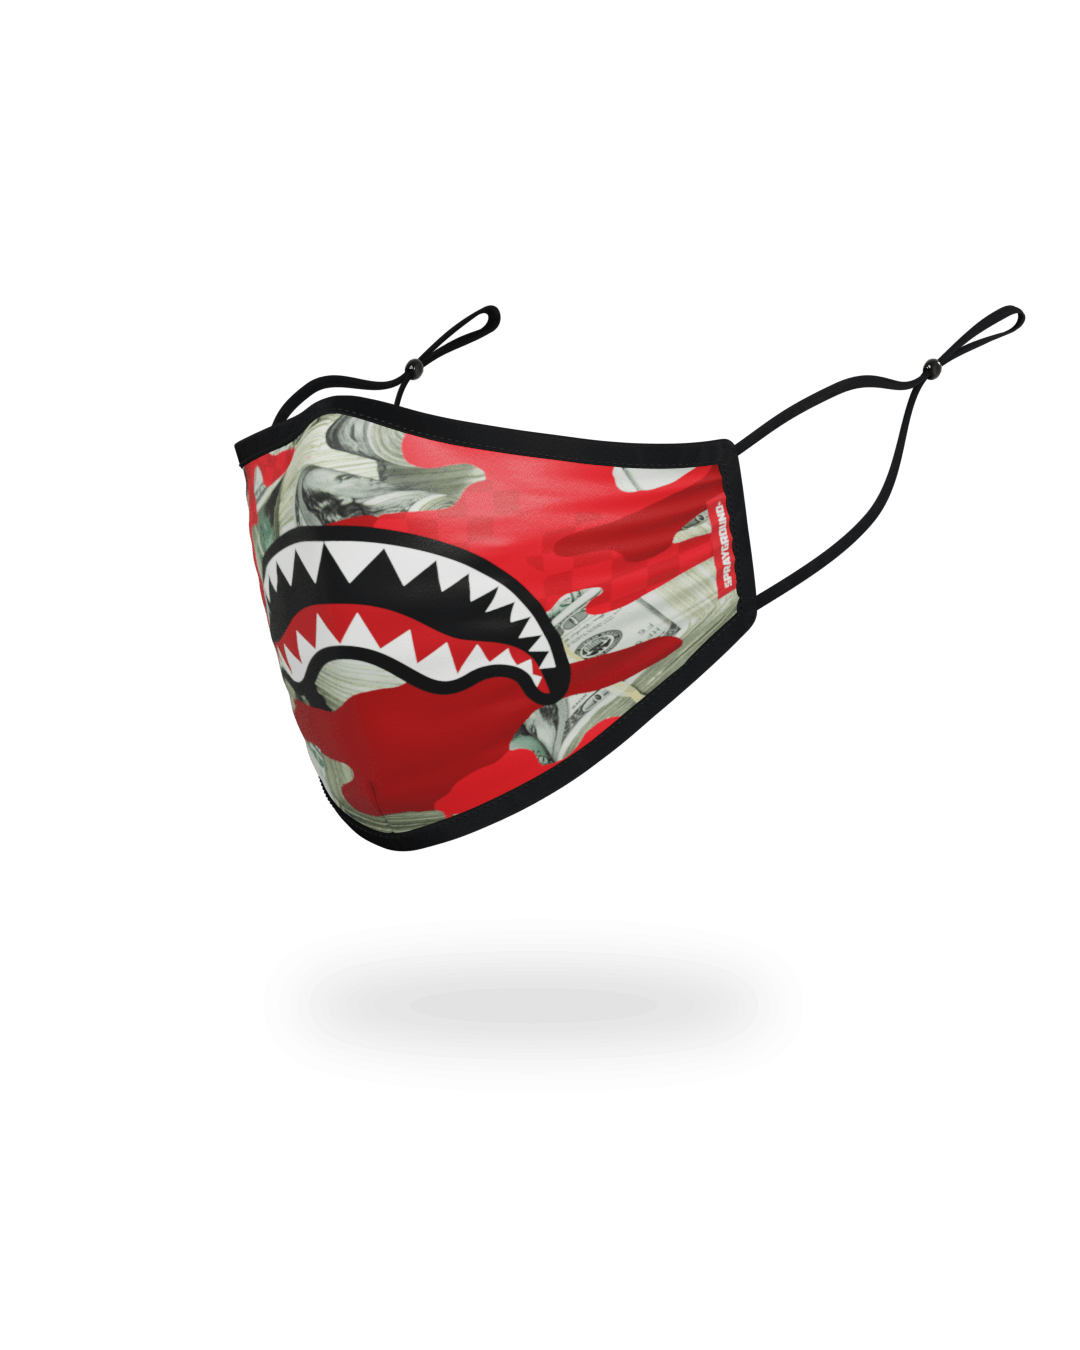 Discount | Adult Money Camo (Red) Form-Fitting Face Mask Sprayground Sale - Discount | Adult Money Camo (Red) Form-Fitting Face Mask Sprayground Sale-04-4